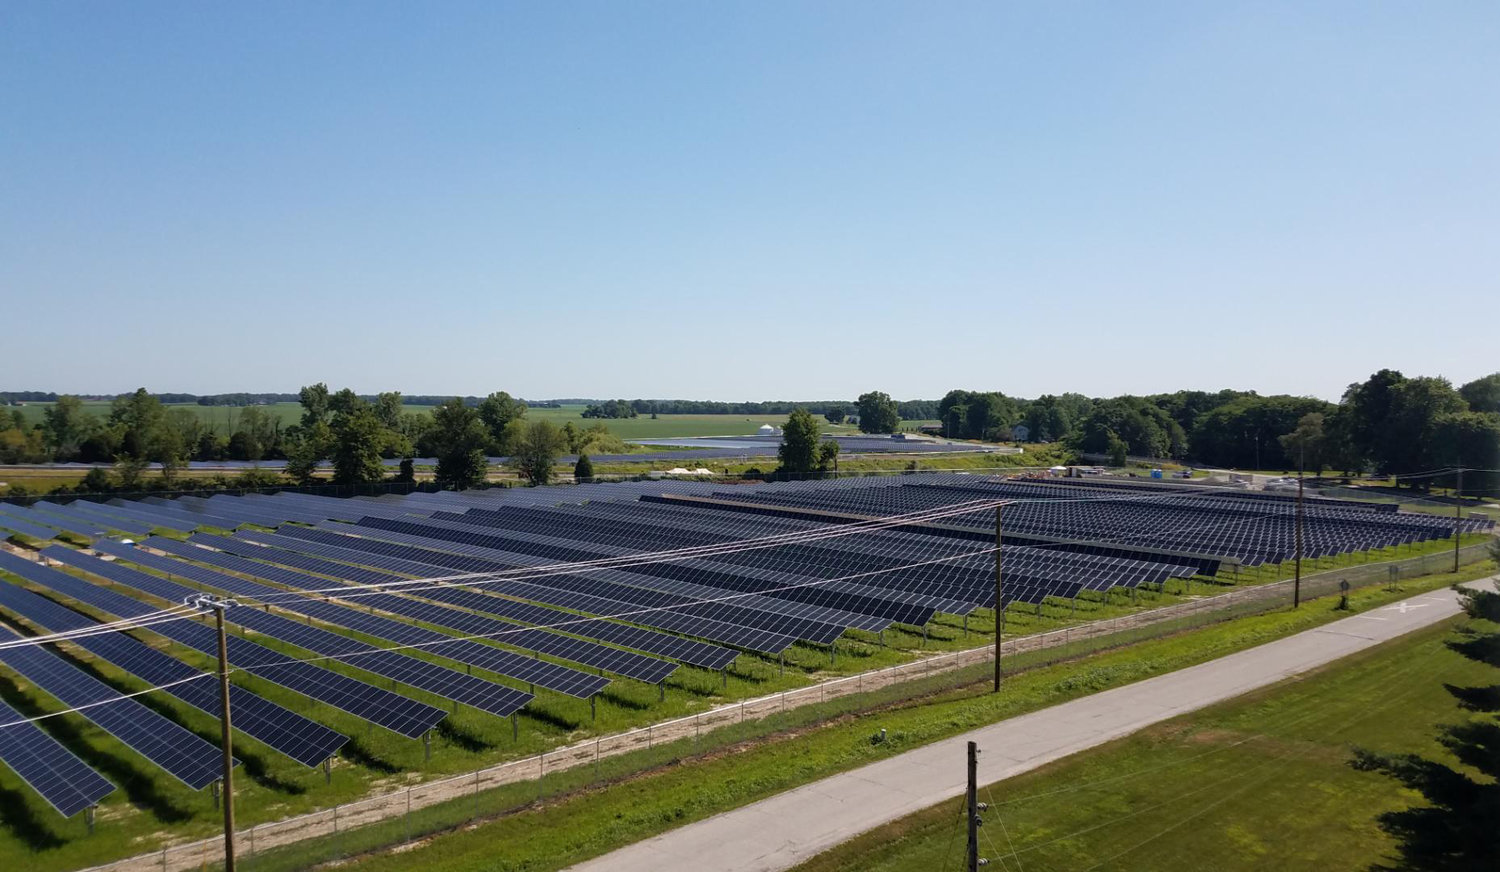 The solar panels are installed at the new solar park being built at the Crawfordsville Commerce Park off Concord Road. Crews still have to lay the cable connecting everything before the park can begin generating electricity.